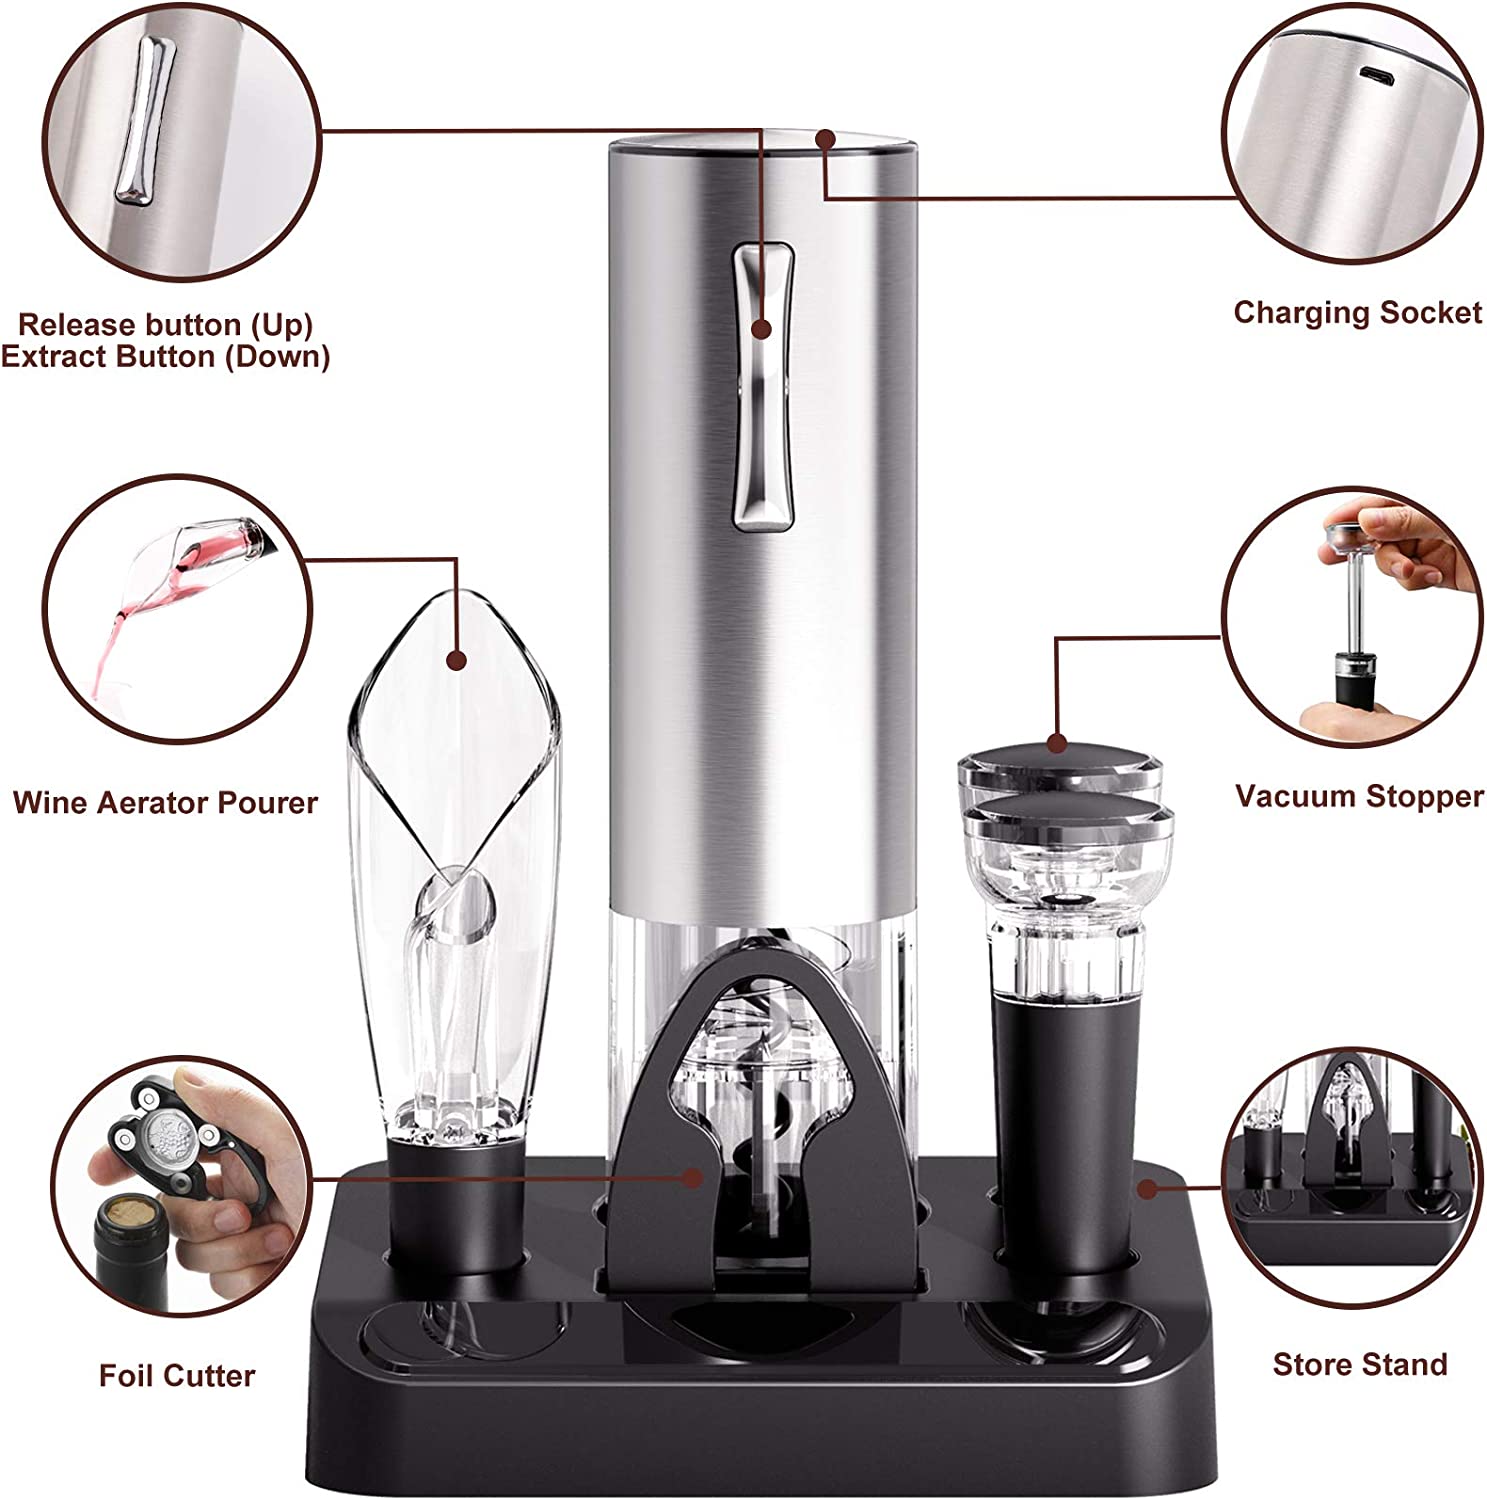 Foneta Electric Wine Opener Rechargeable Wine Bottle Opener with Charging  Base, Wine Aerator Pourer, Foil Cutter,